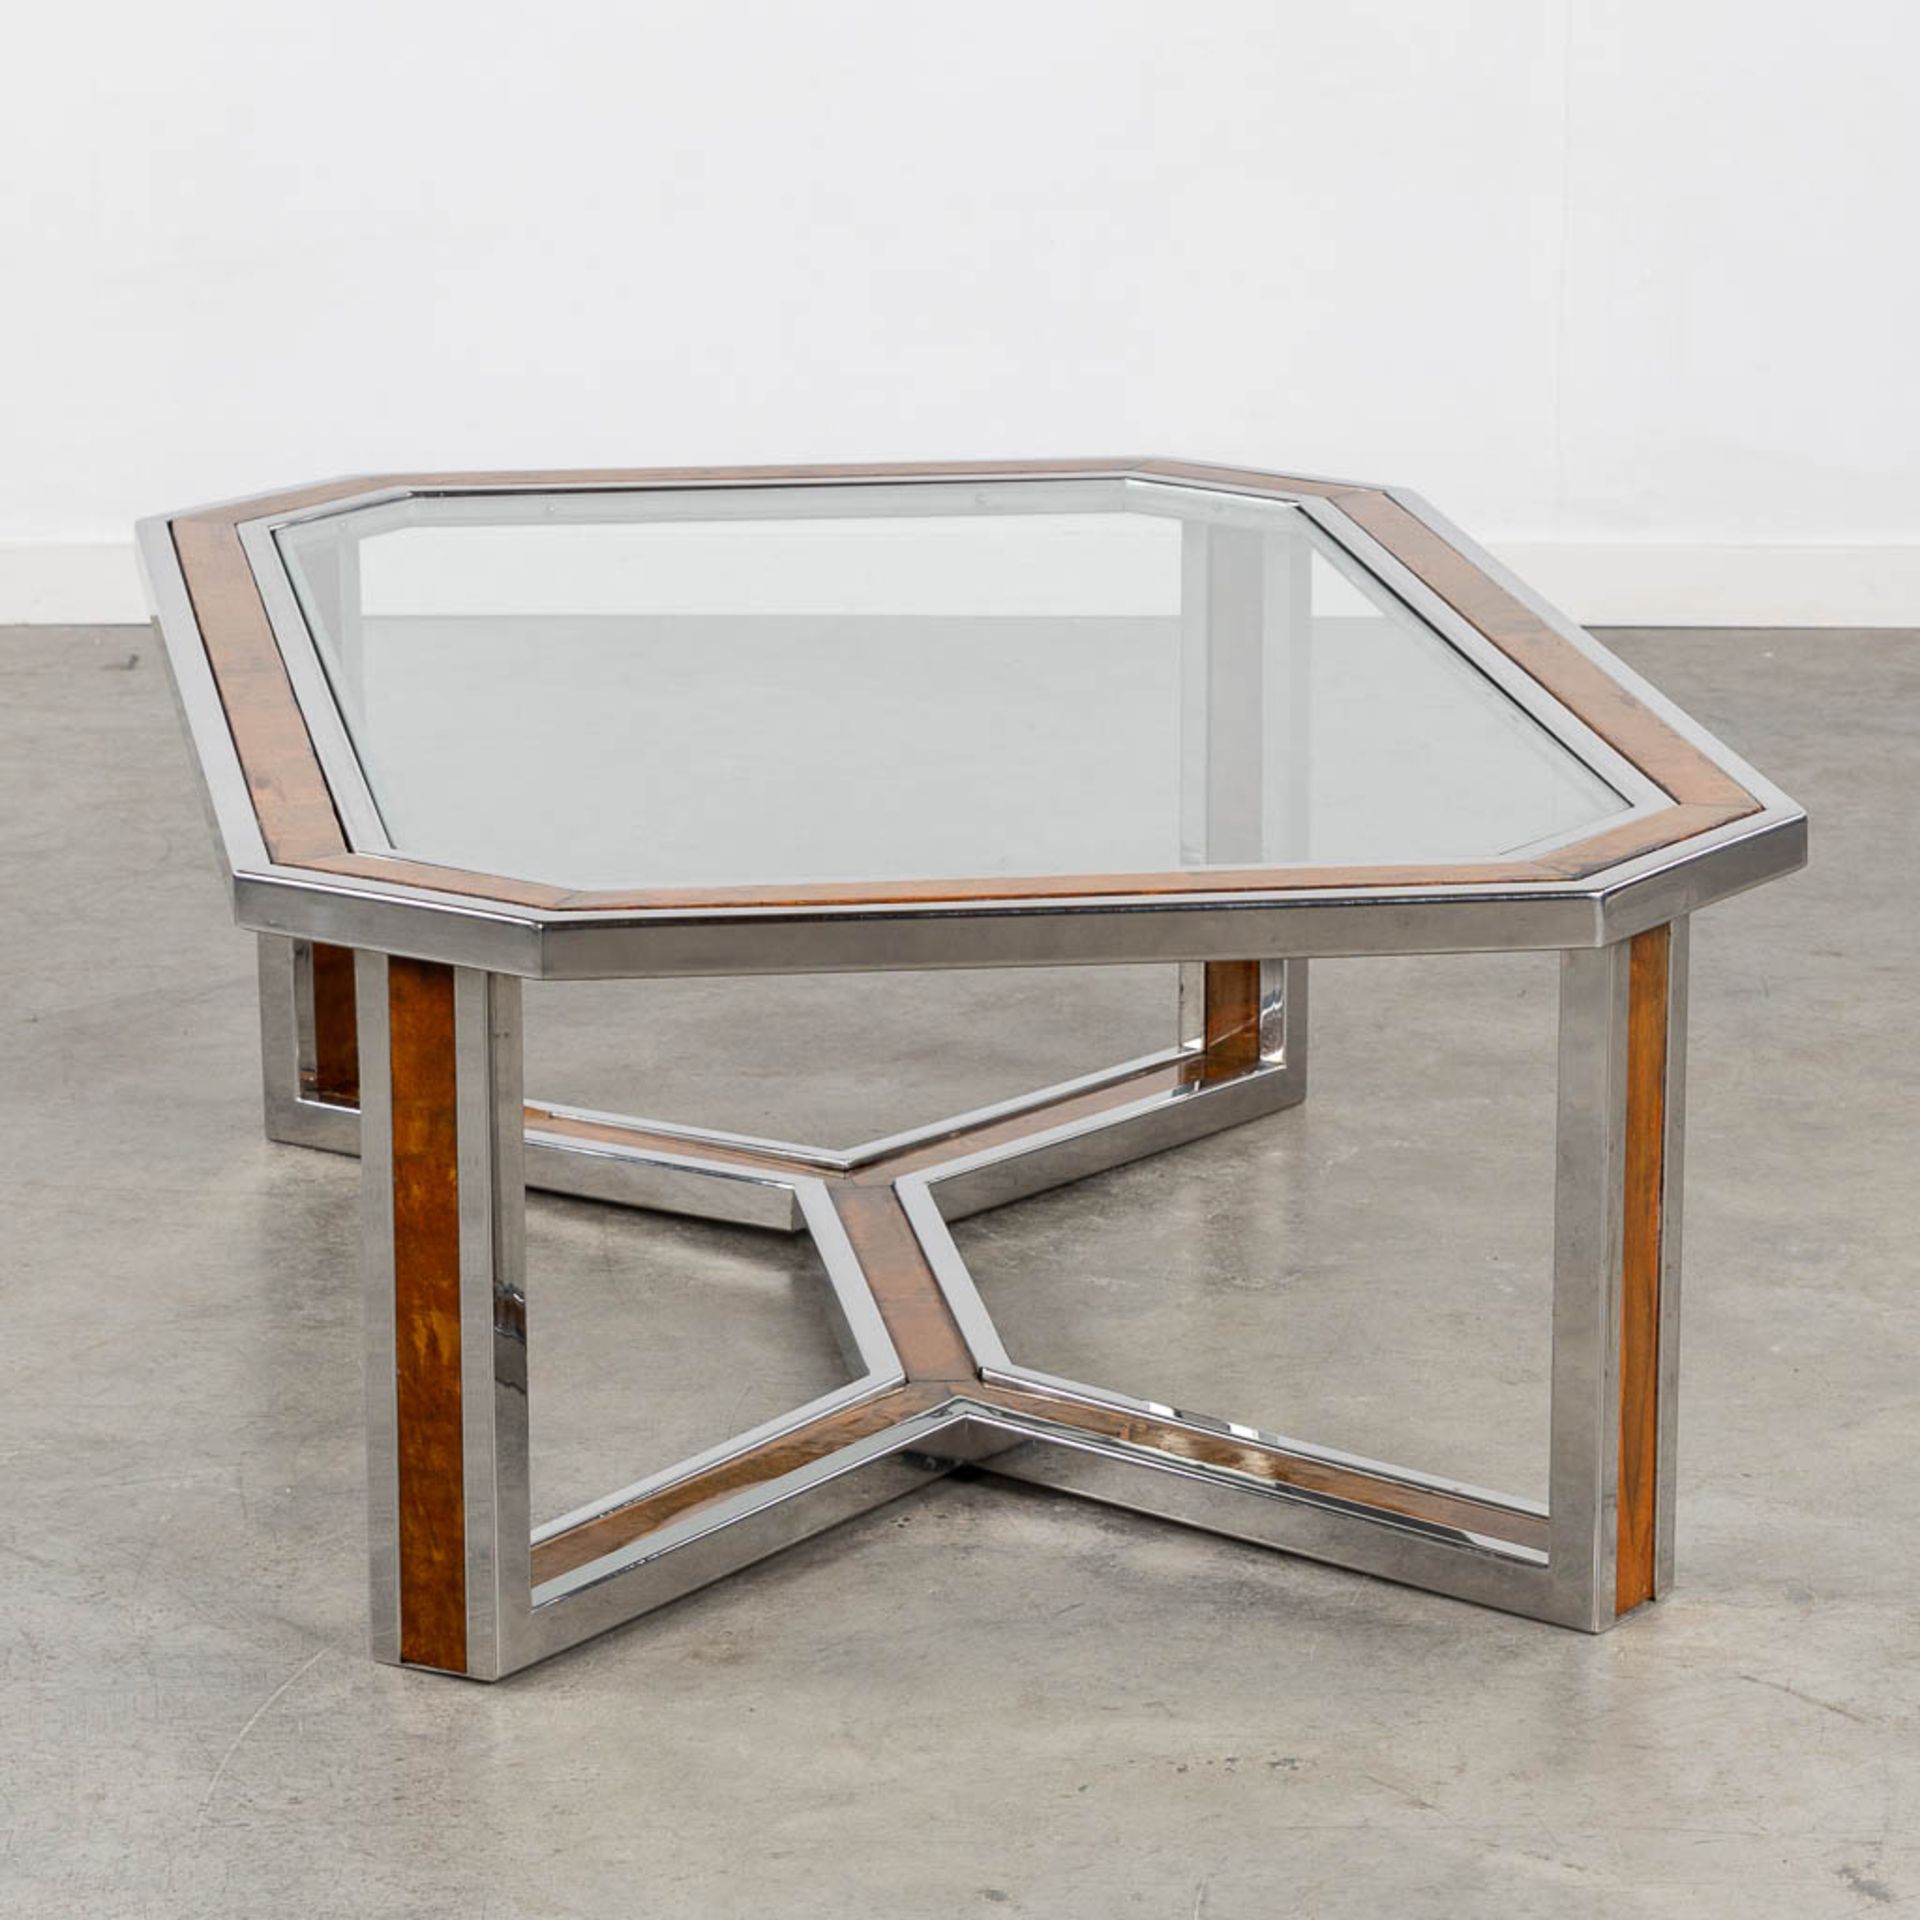 A coffee table, chrome with a faux wood inlay and a glass top. (L:80 x W:120 x H:40 cm) - Bild 4 aus 10